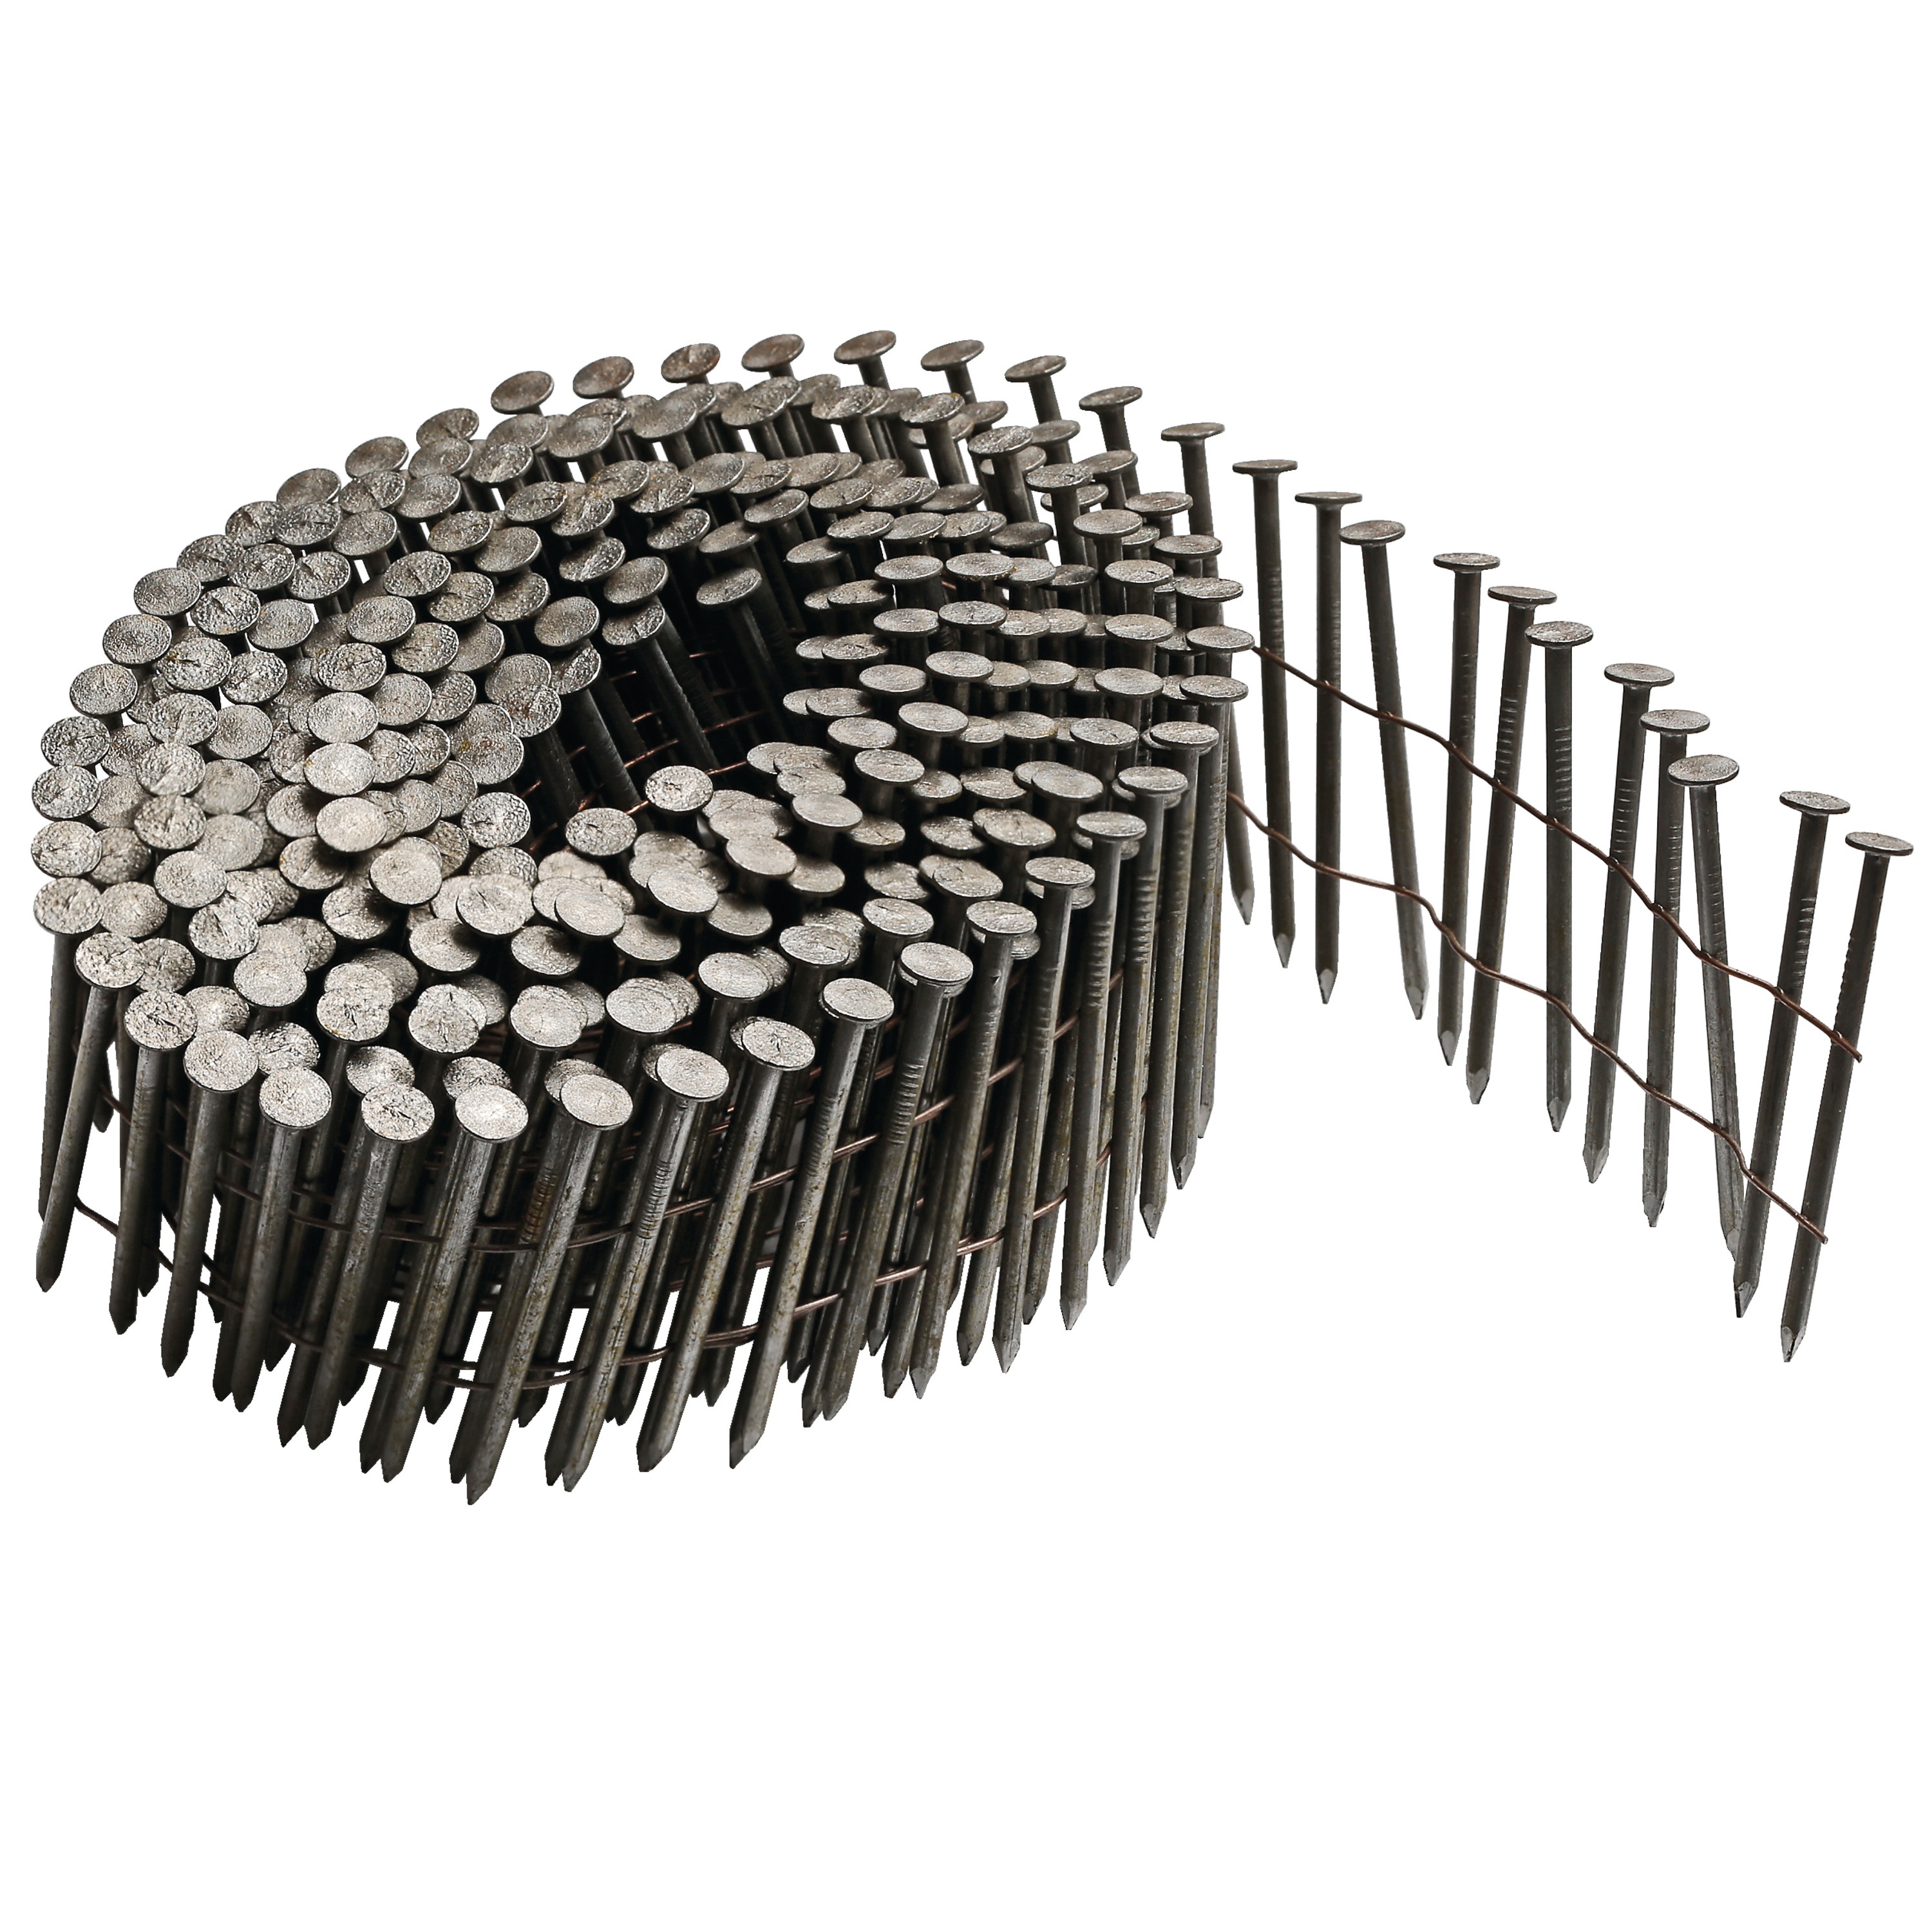 Profile of coil siding nails.